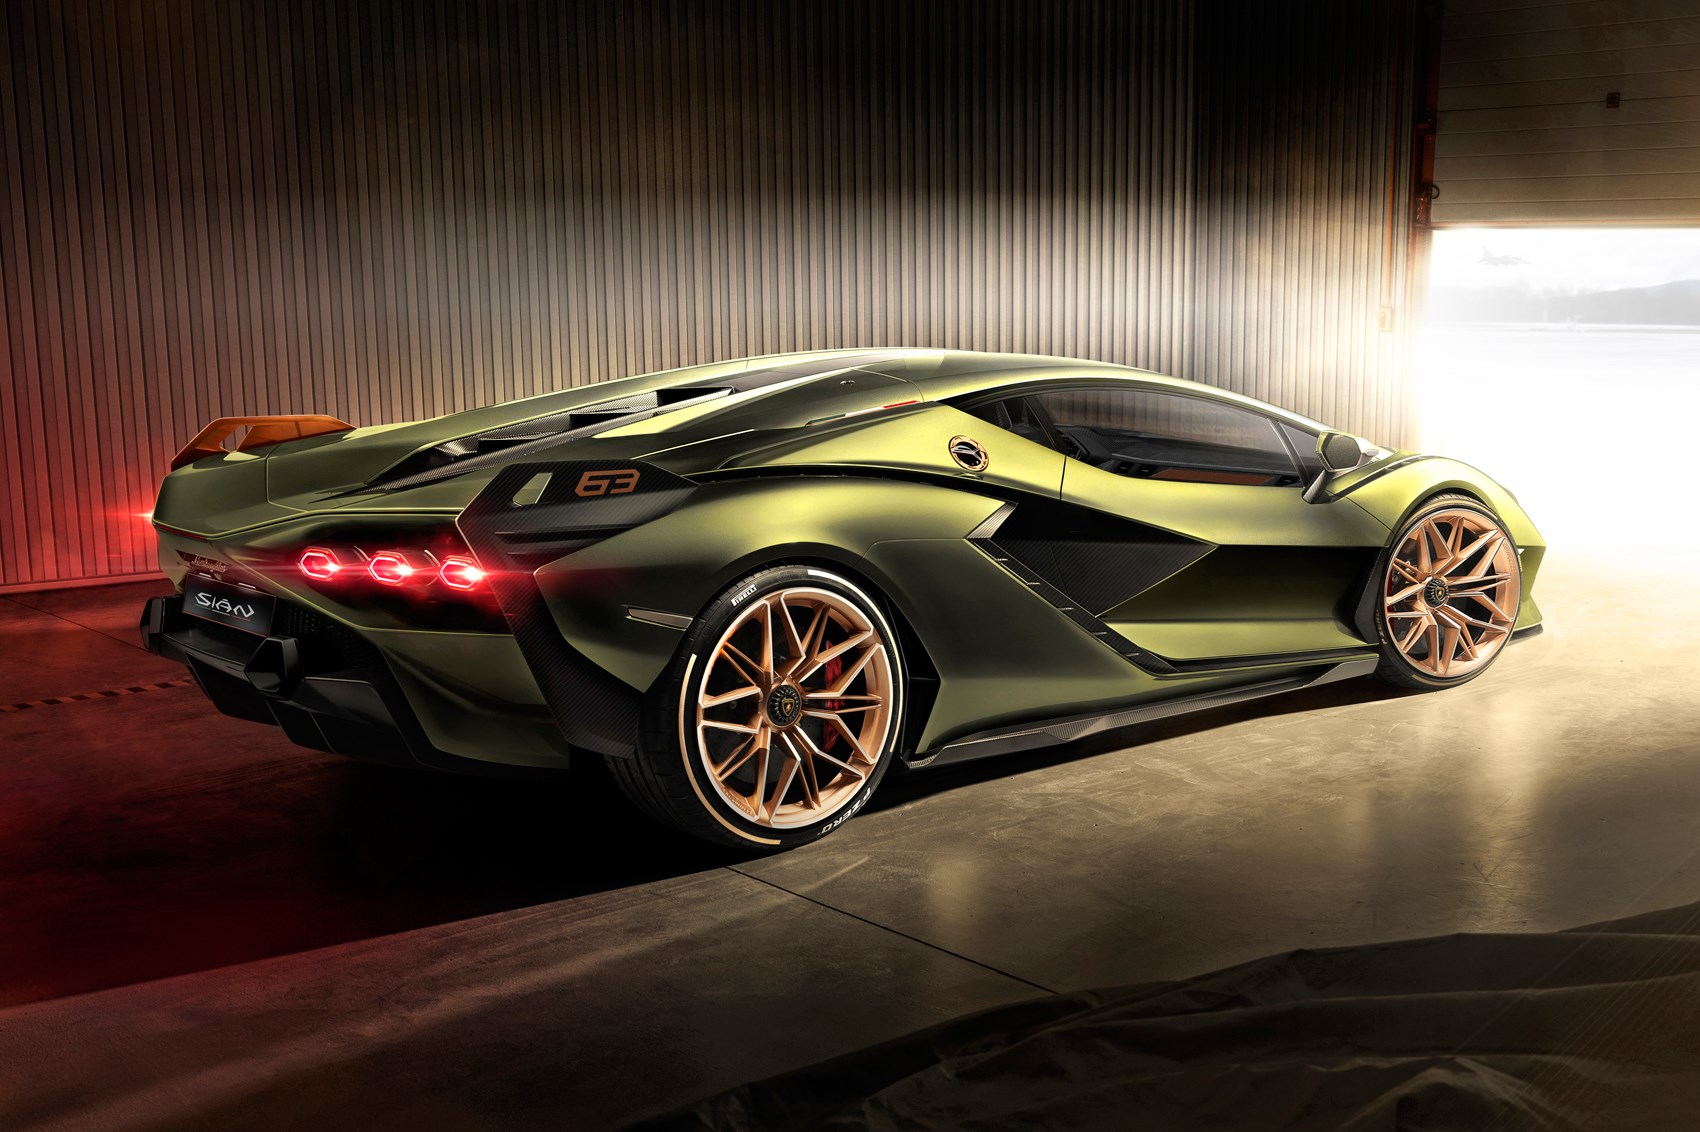 6 interesting facts you didn't know about Lamborghini Sian